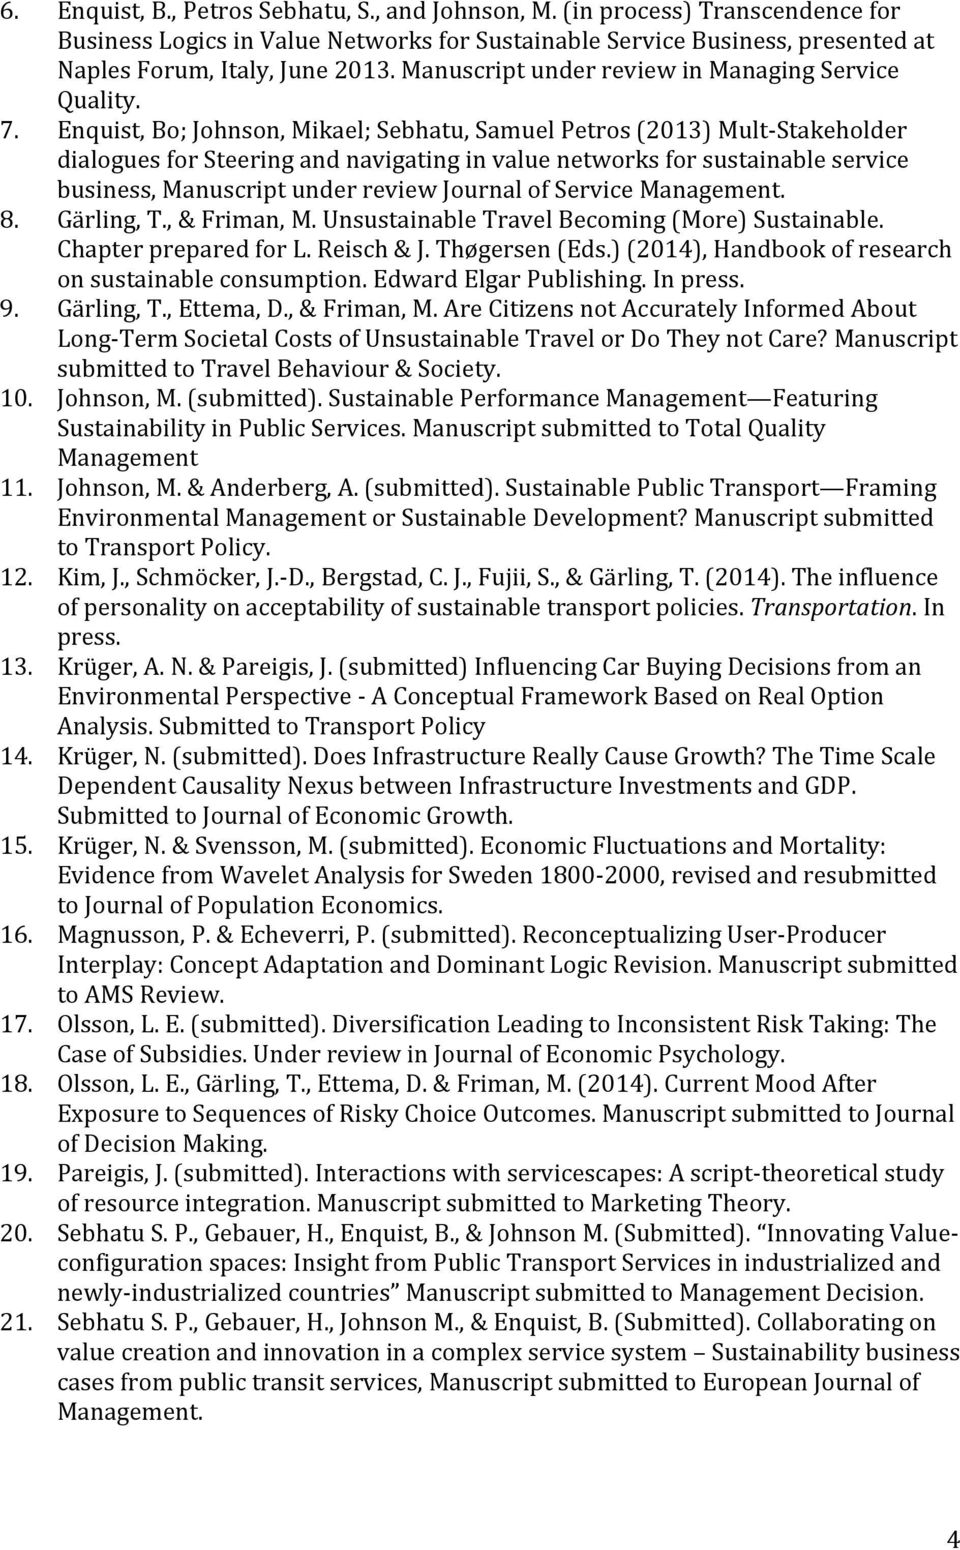 Enquist, Bo; Johnson, Mikael; Sebhatu, Samuel Petros (2013) Mult- Stakeholder dialogues for Steering and navigating in value networks for sustainable service business, Manuscript under review Journal